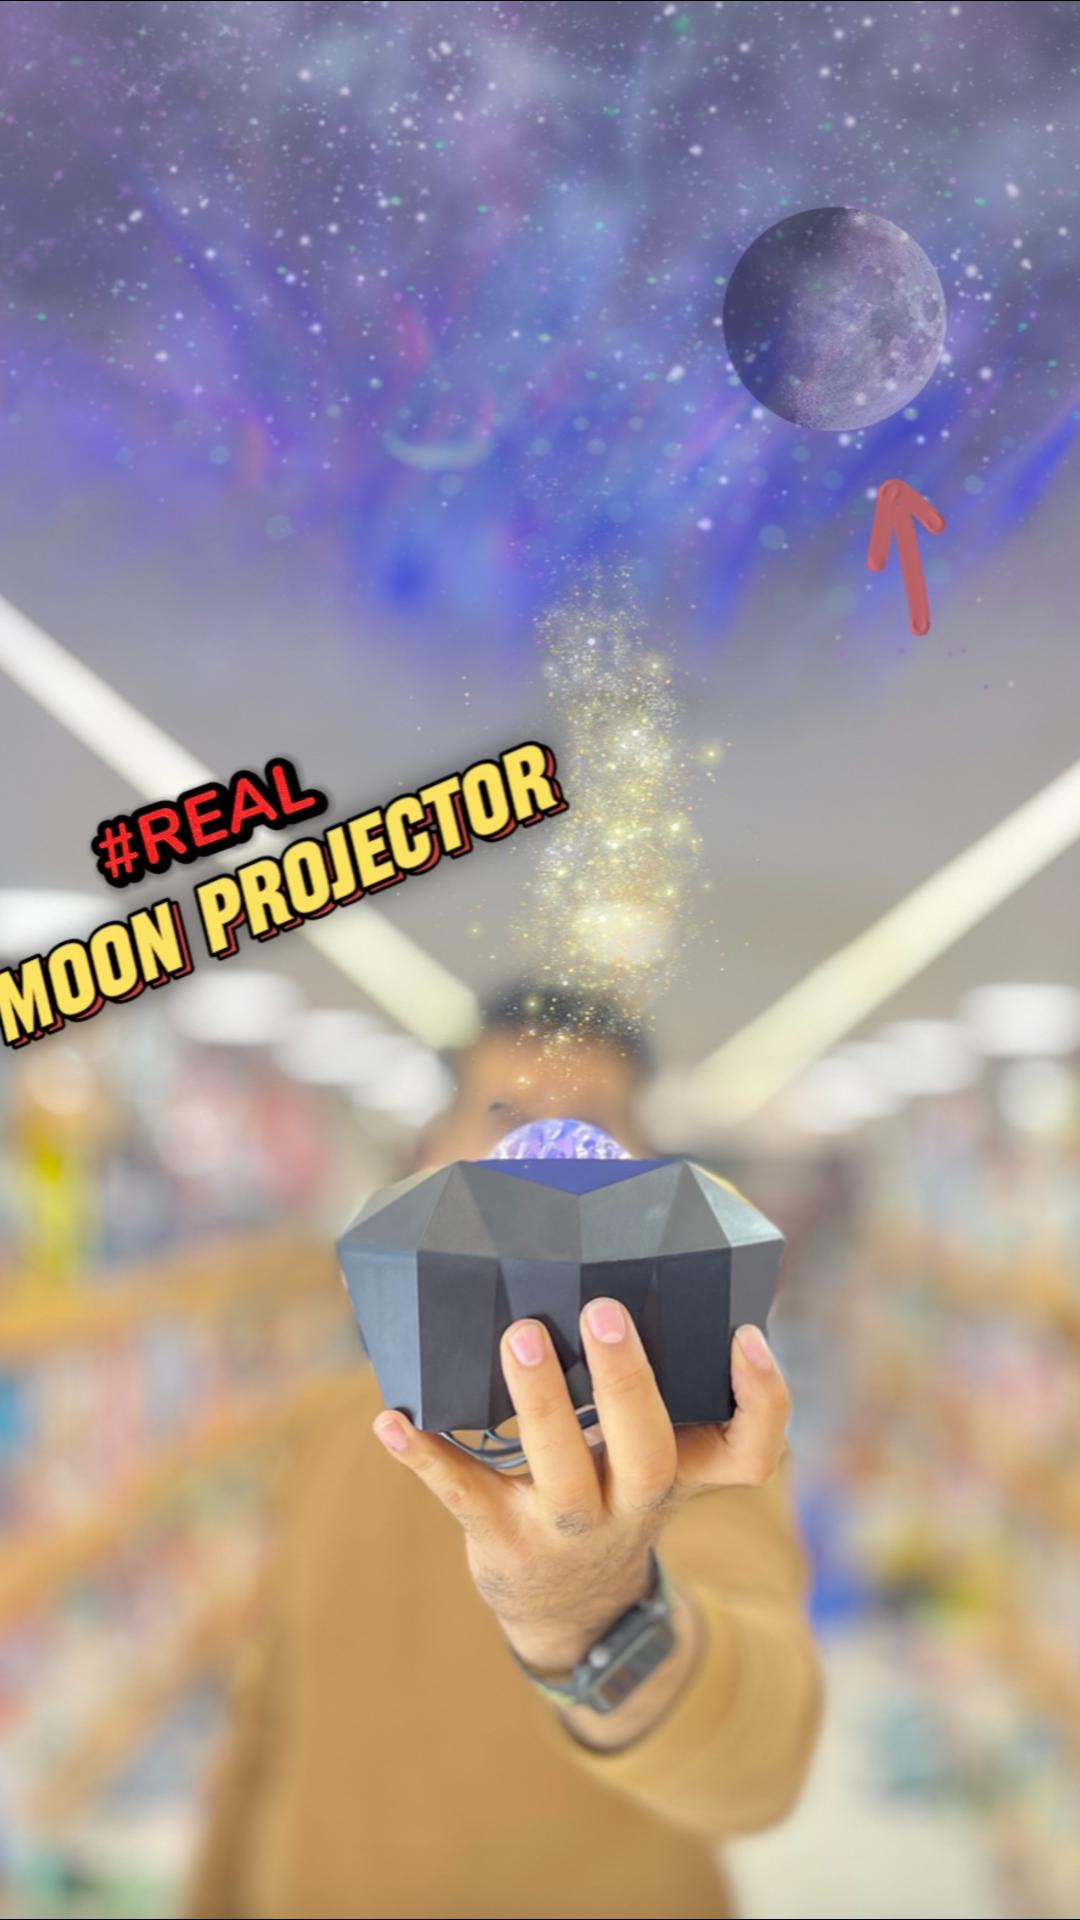 New Aurora Lights Star Moon Projector with Remote Control & Bluetooth Music Speaker - Latest Moon projector - Playmaster toys video